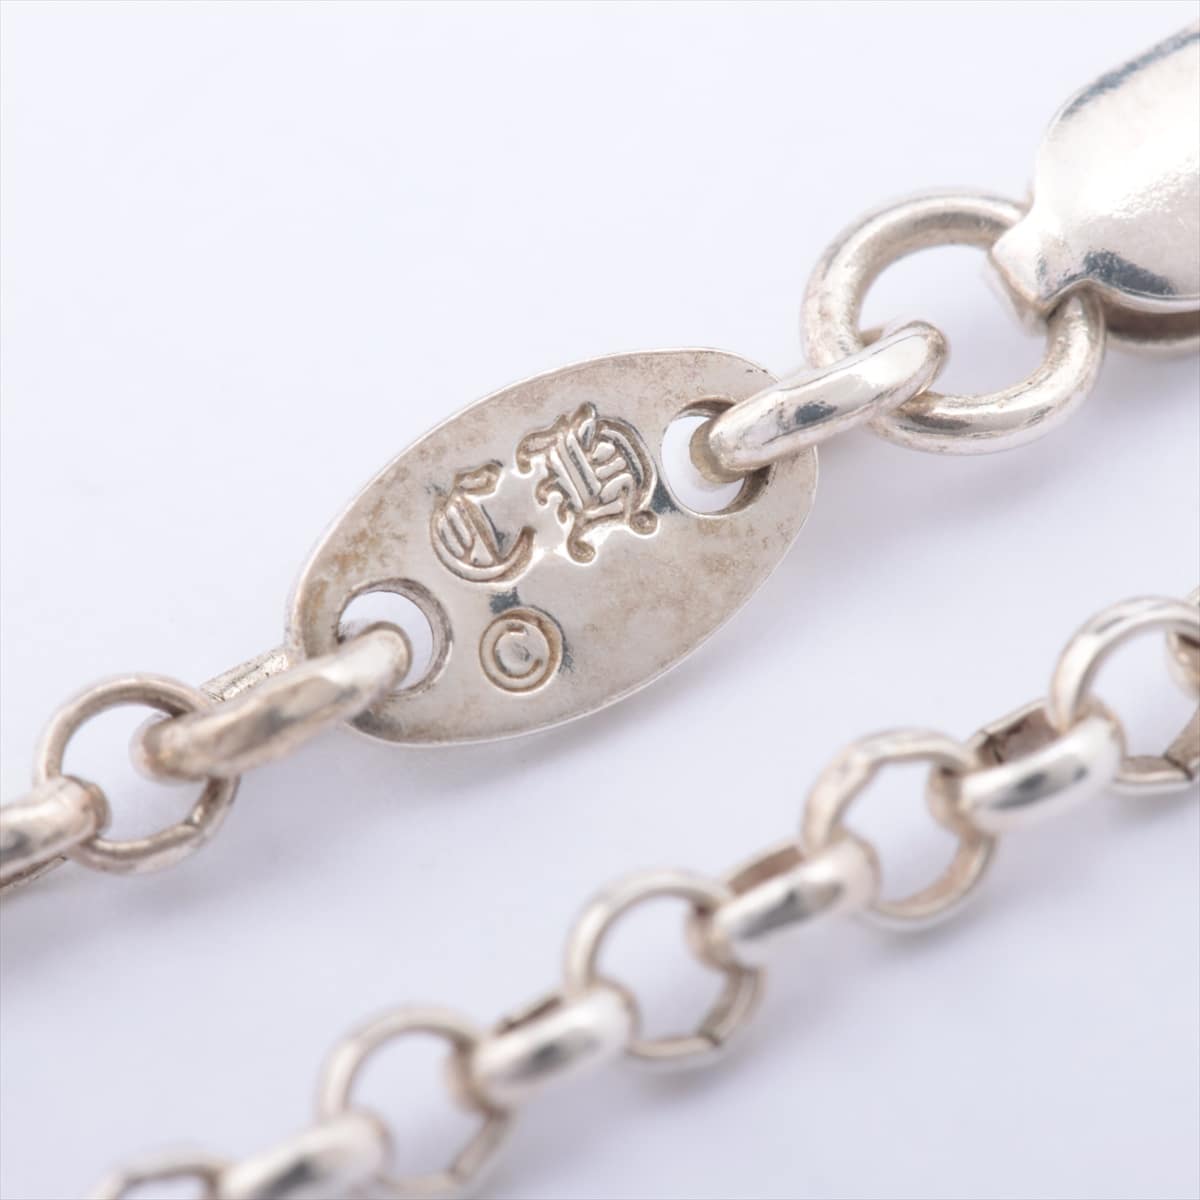 Chrome Hearts CH Cross Baby fat charms Necklace 925 7.3g With invoice 1P diamond